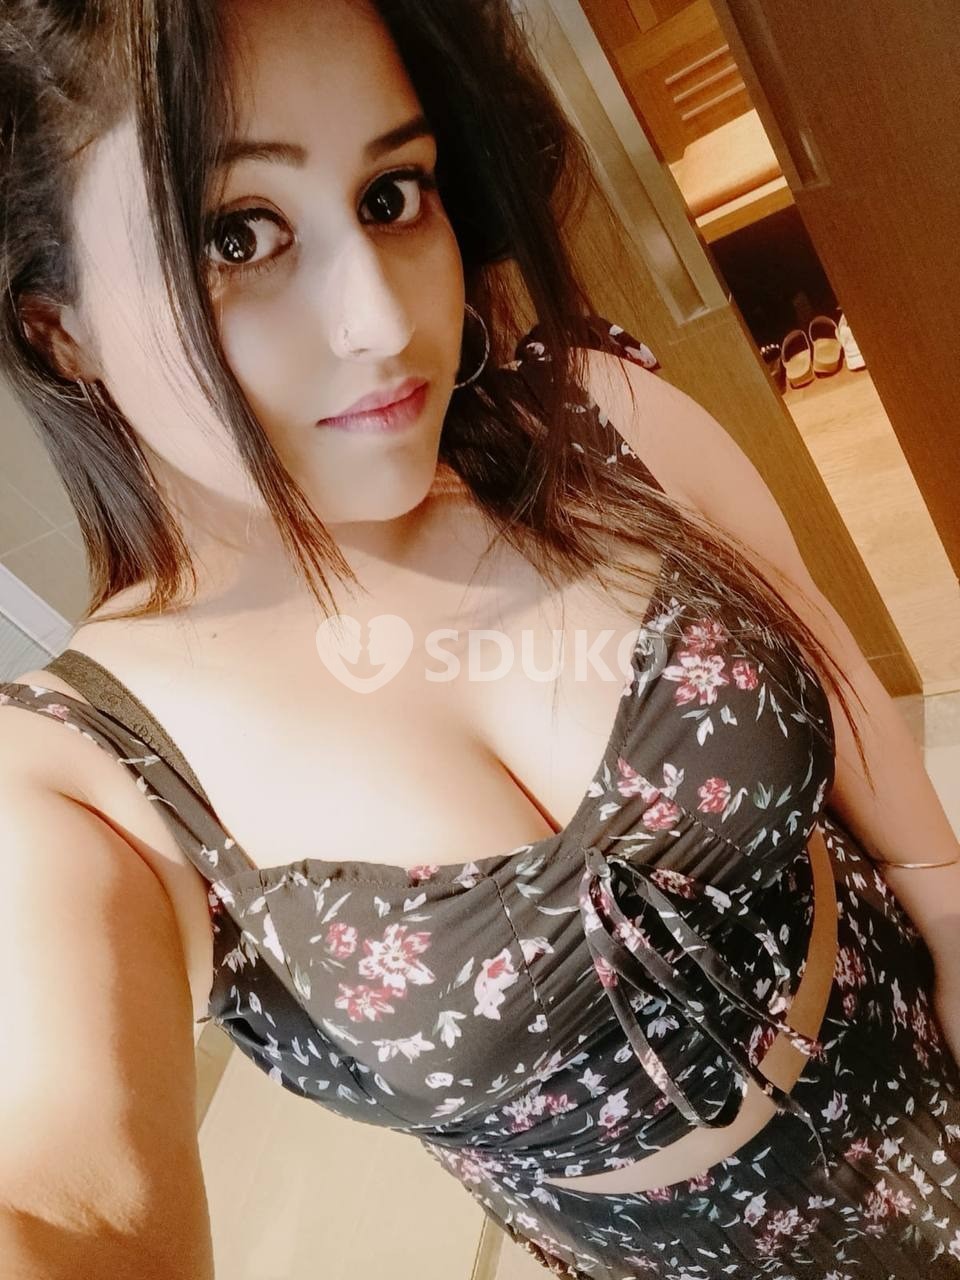 DEHRADUN ⭐ HOME AND HOTEL SERVICE AVAILABLE FULL SAFE AND SECURE SERVICE AVAILABLE HETAL 21